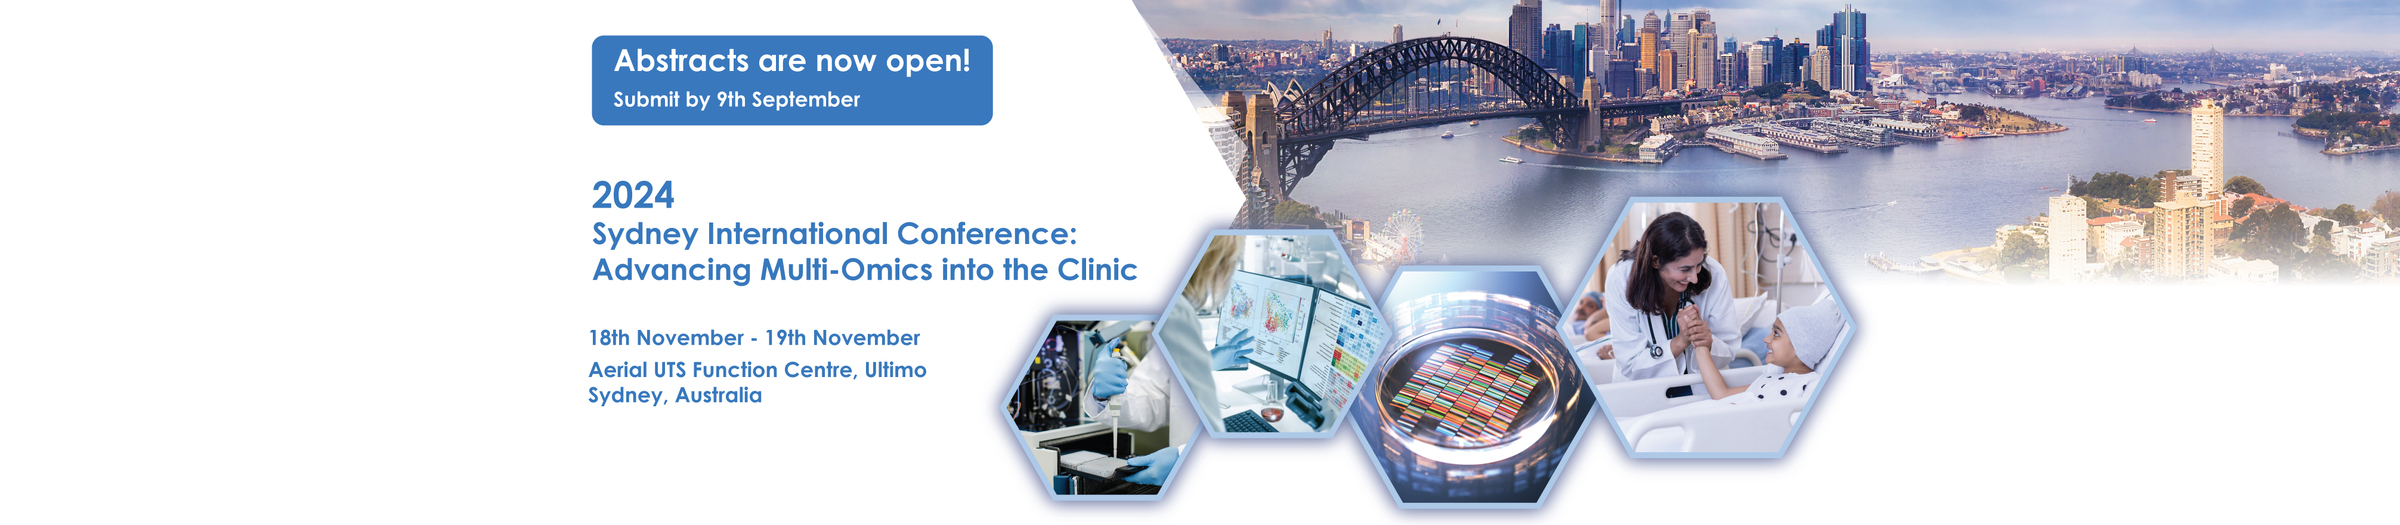 Sydney International Conference: Advancing Multi-Omics into the Clinic 